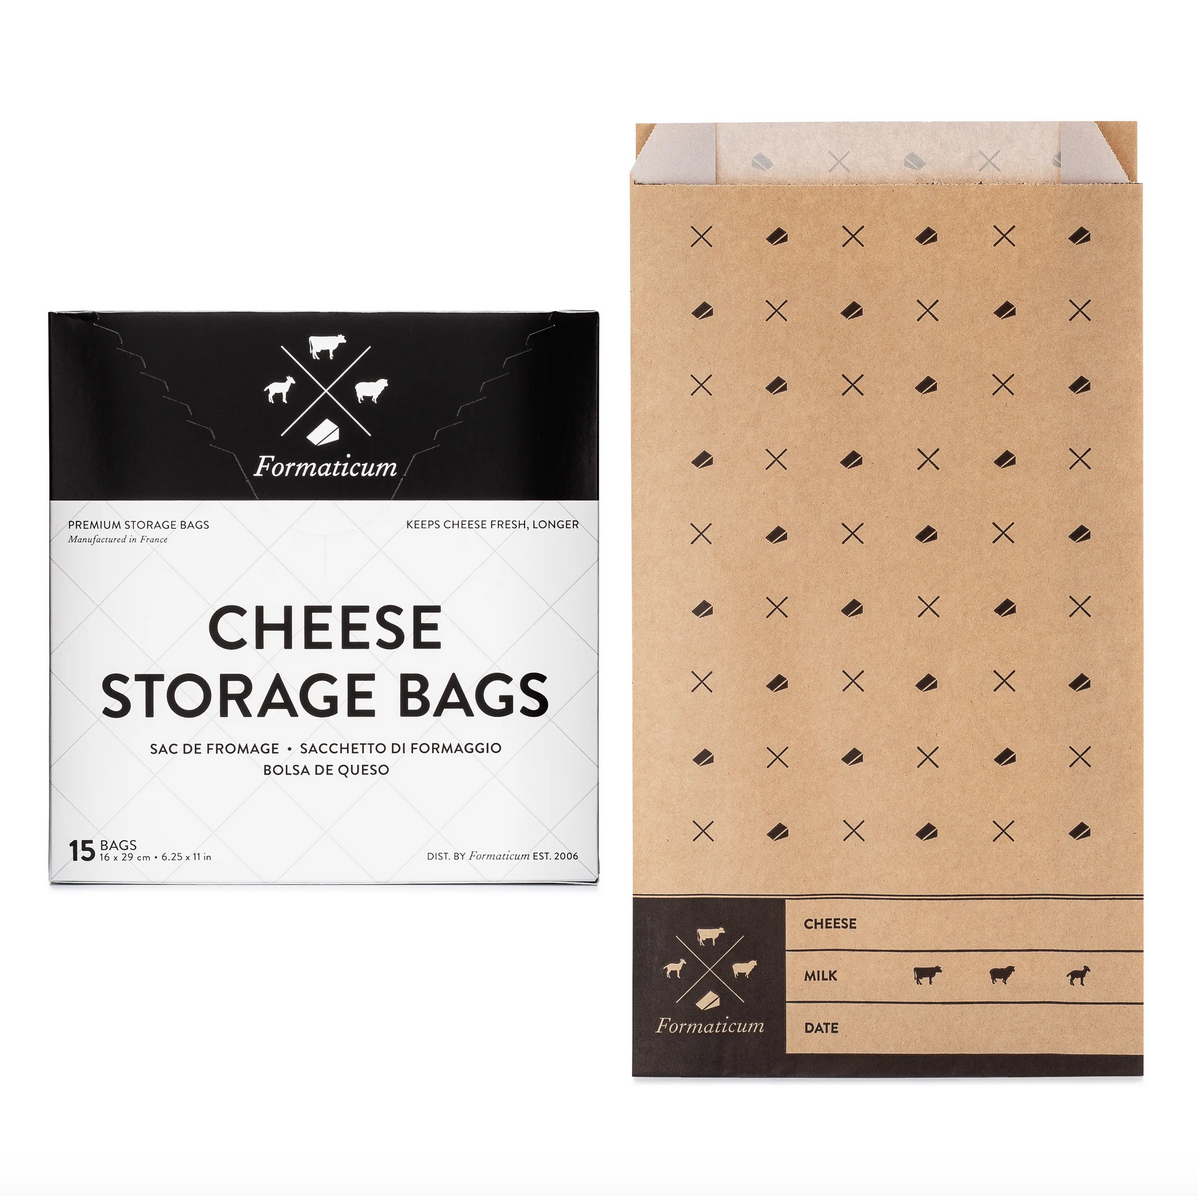 CHEESE STORAGE BAGS